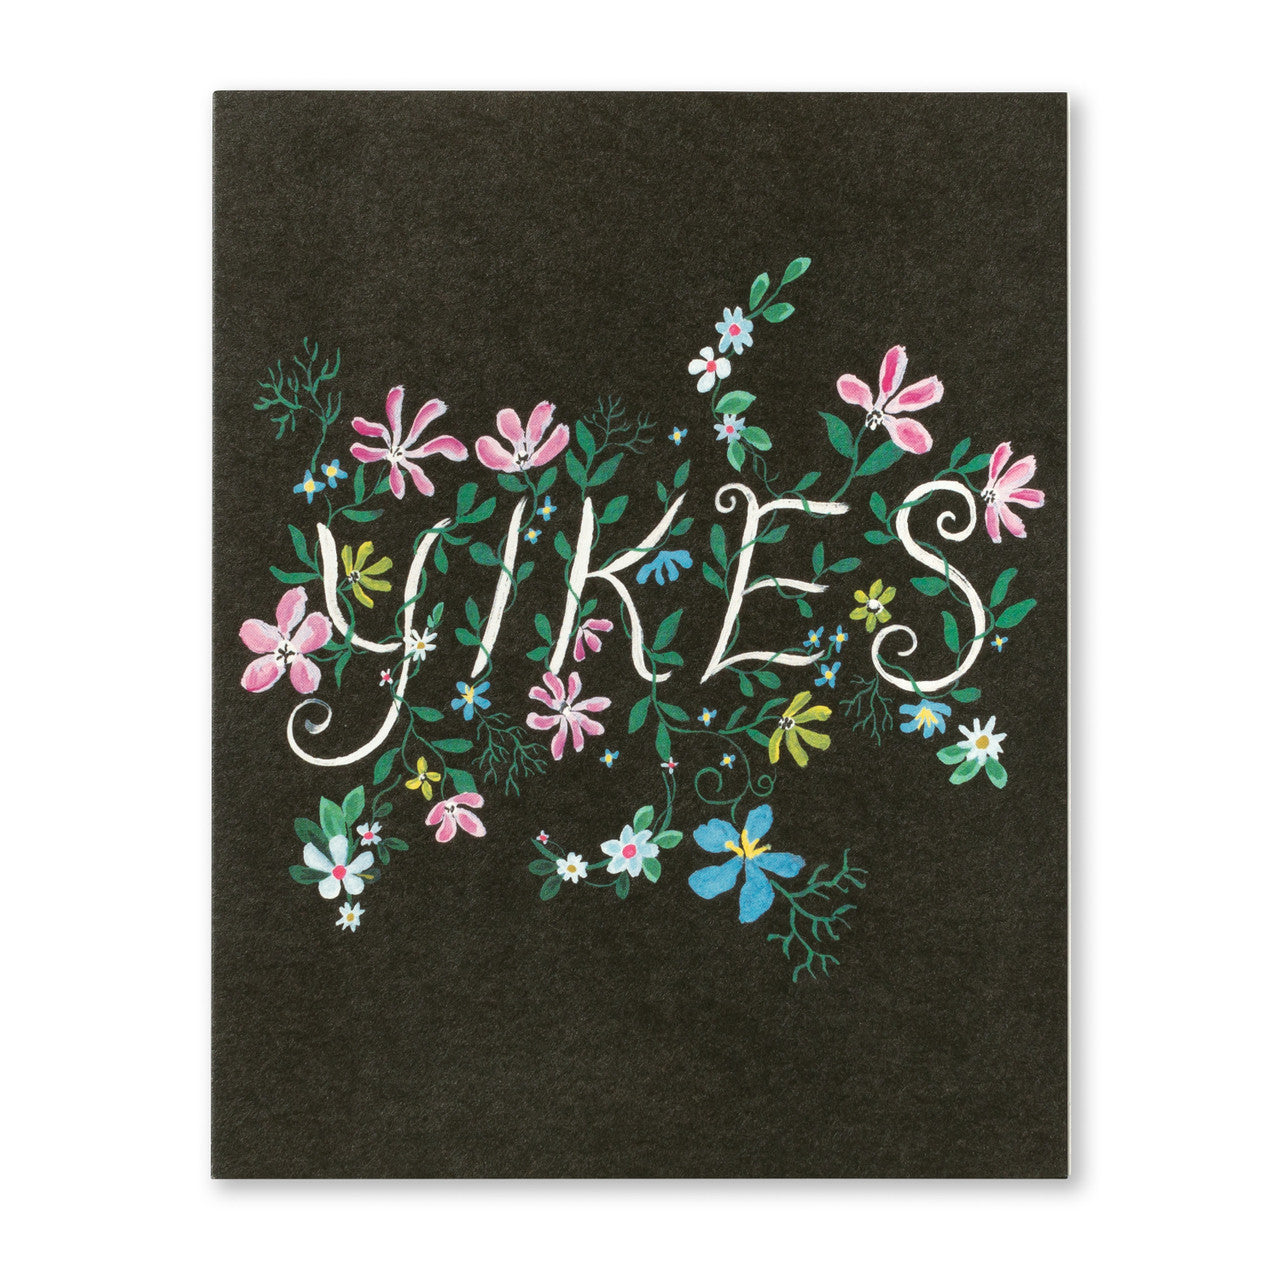 Love Muchly Greeting Card - Sorry - Yikes - Mellow Monkey